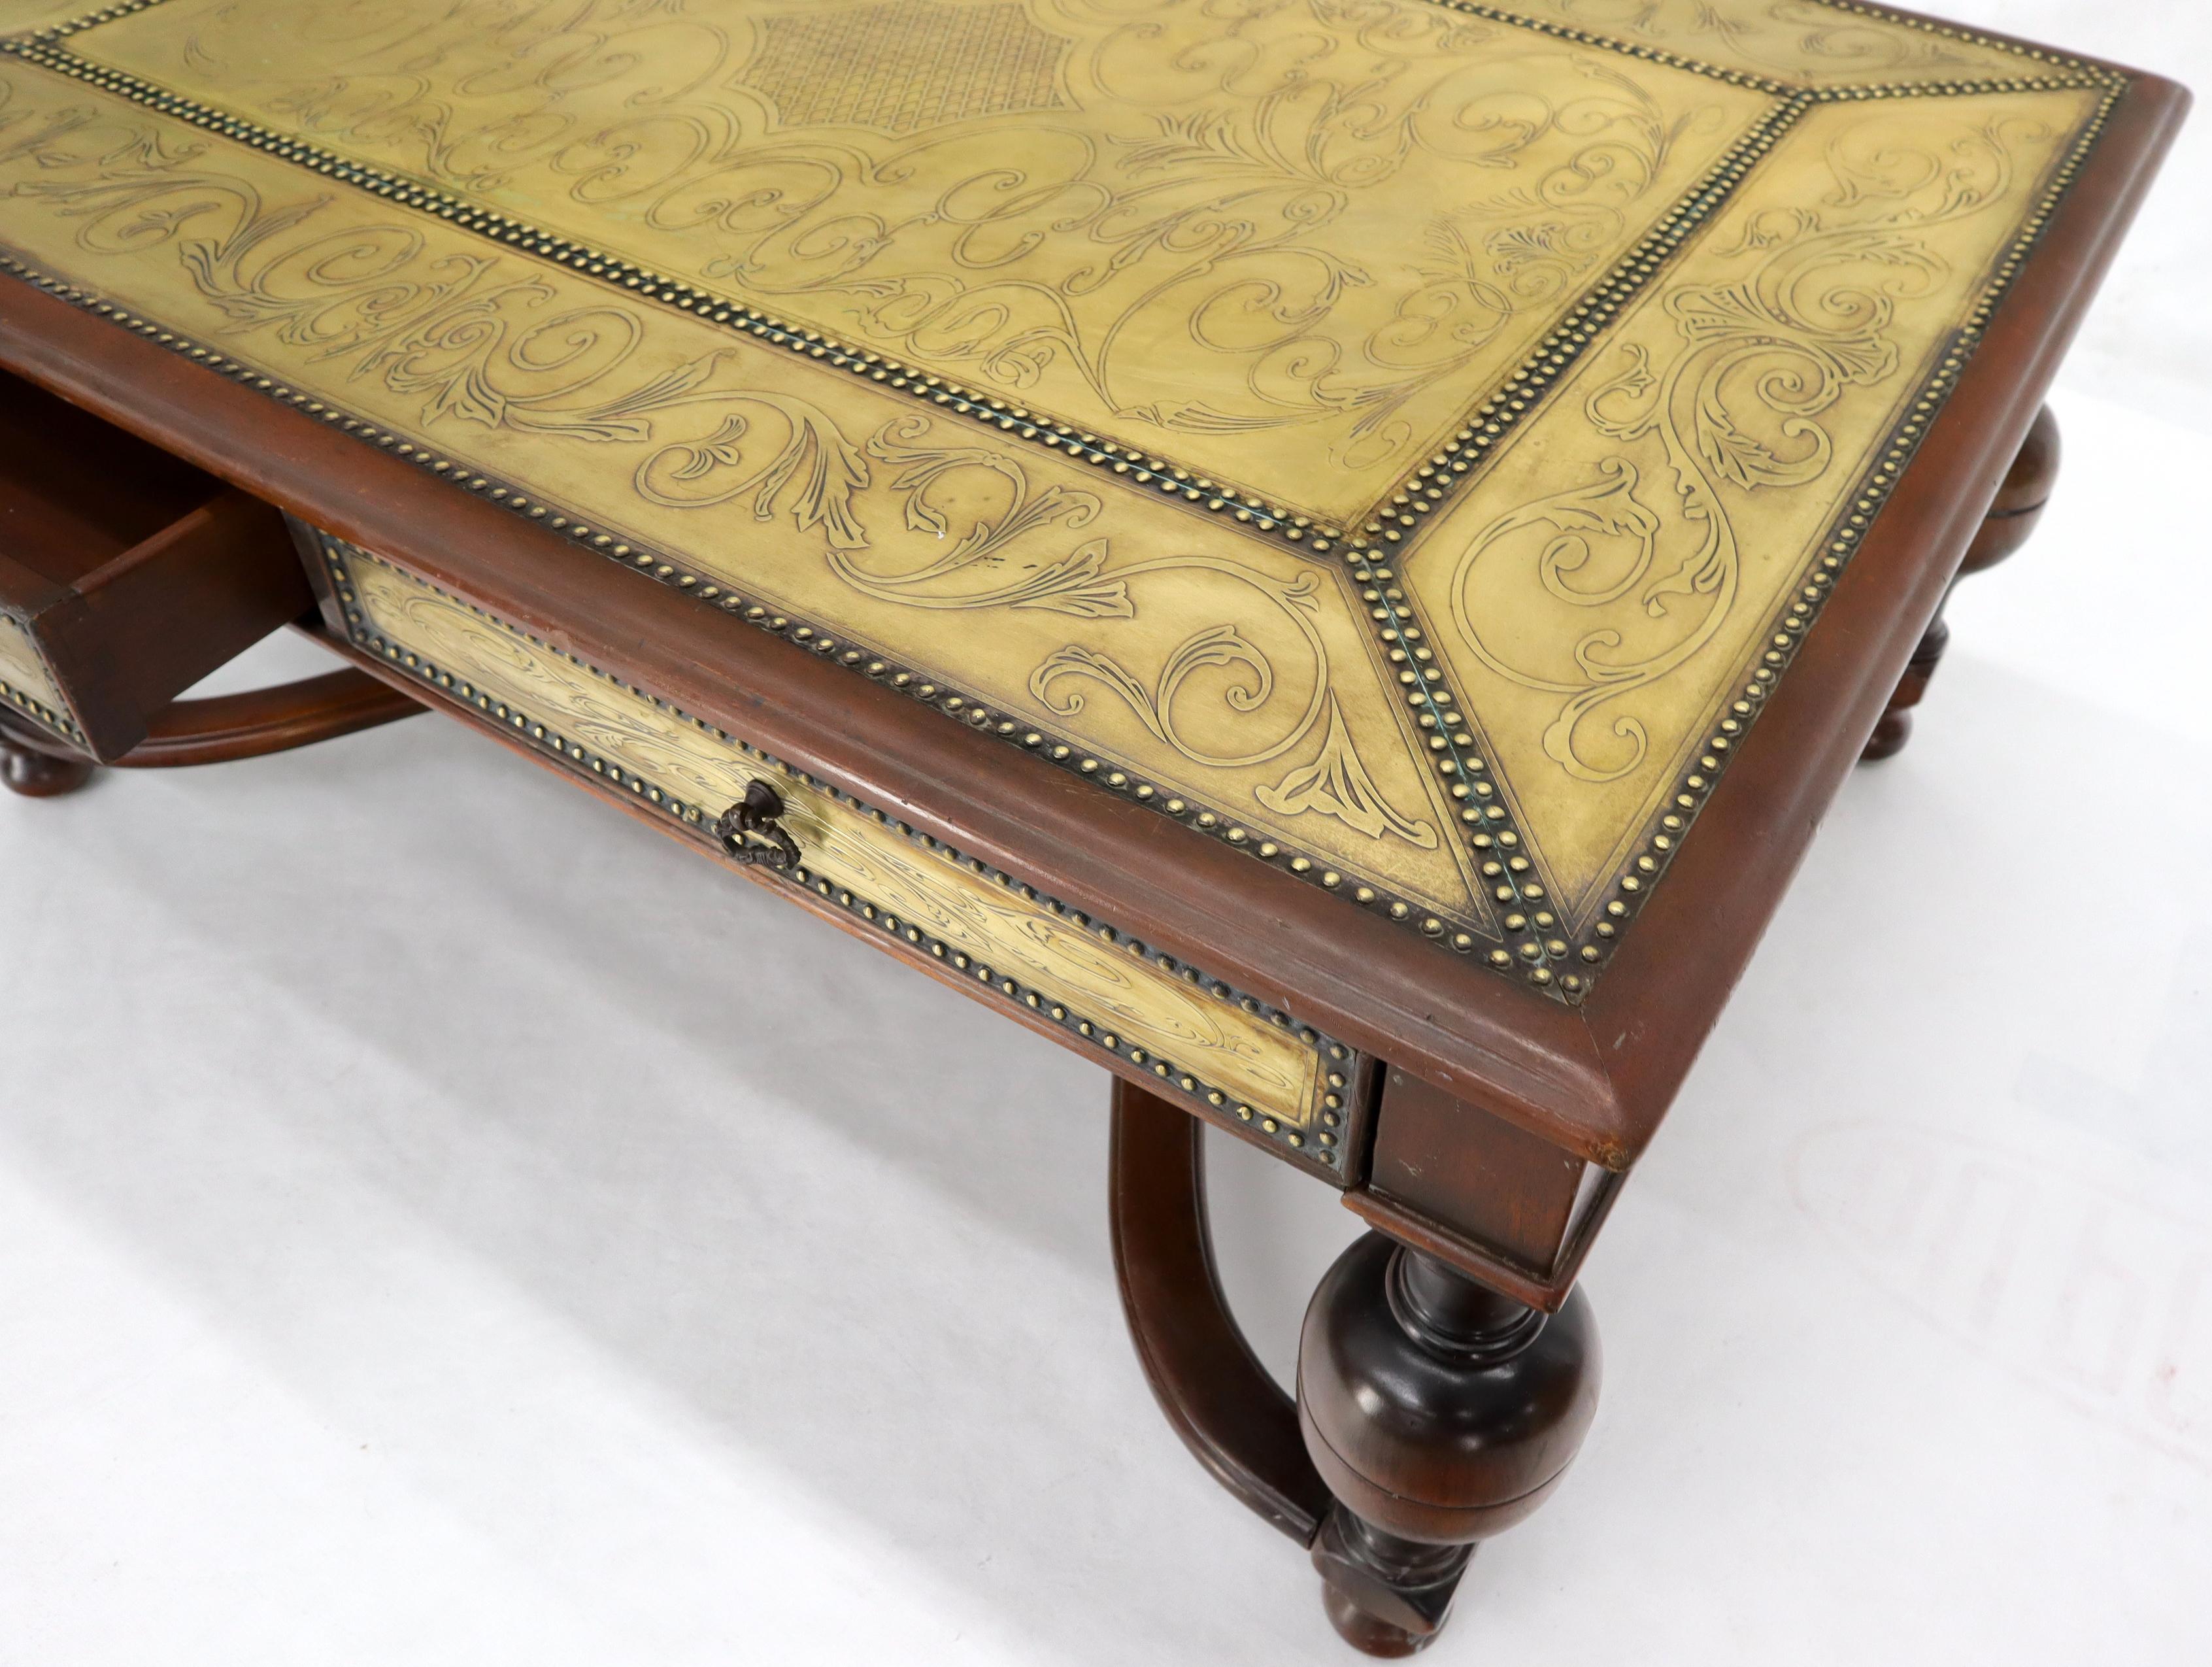 Figural carved and stretchers thick turned legs base embossed and studded brass top coffee table.